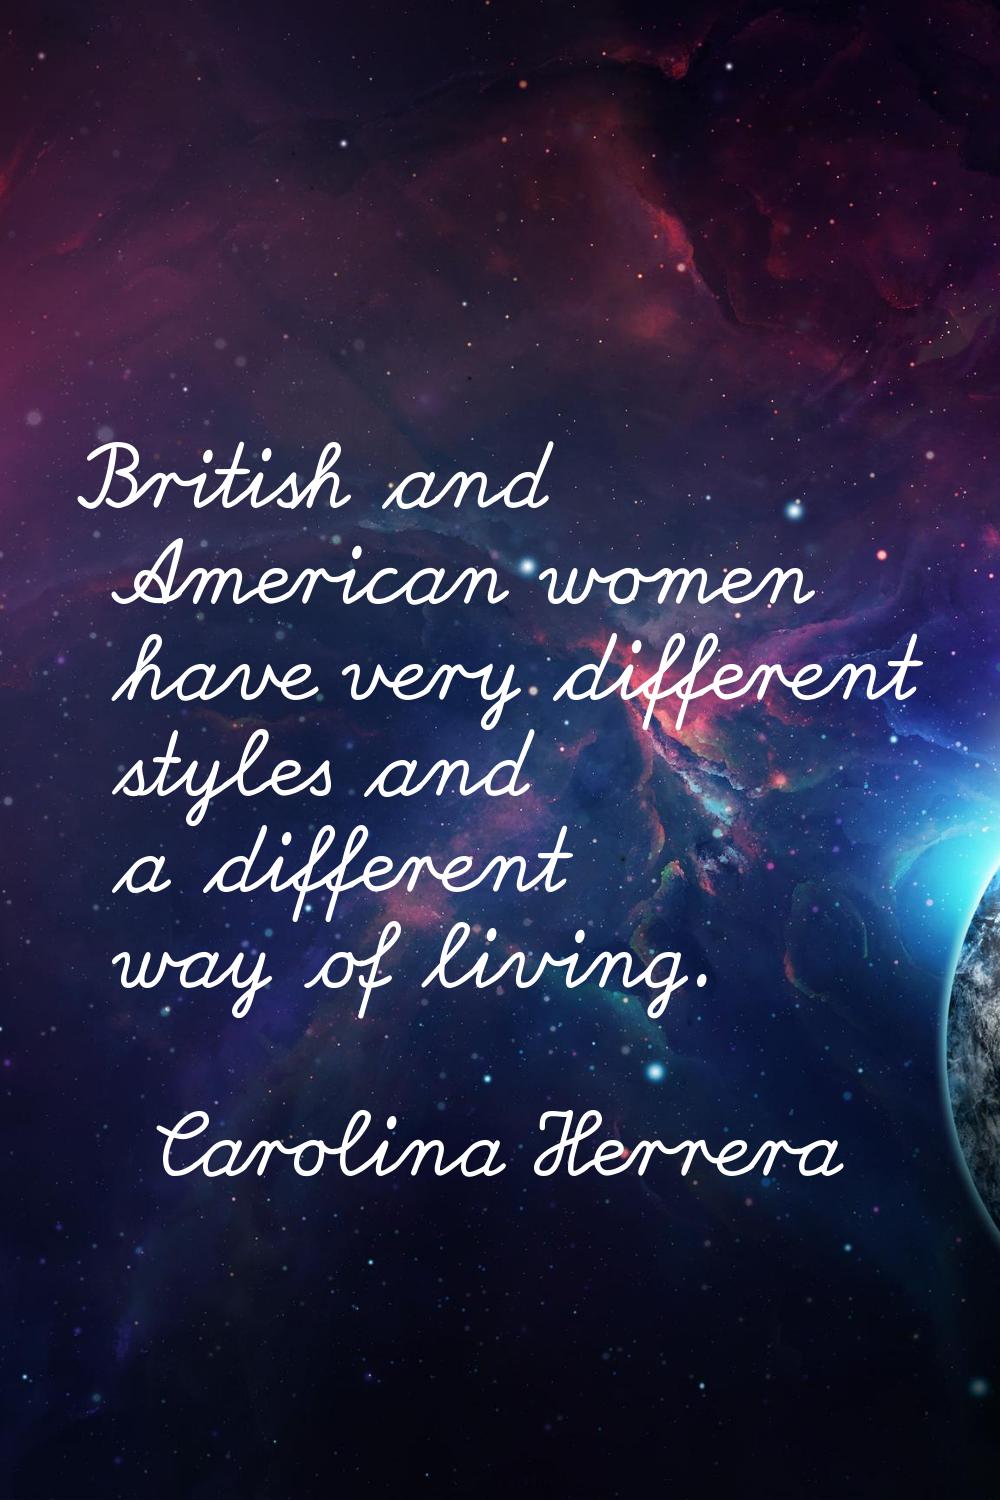 British and American women have very different styles and a different way of living.